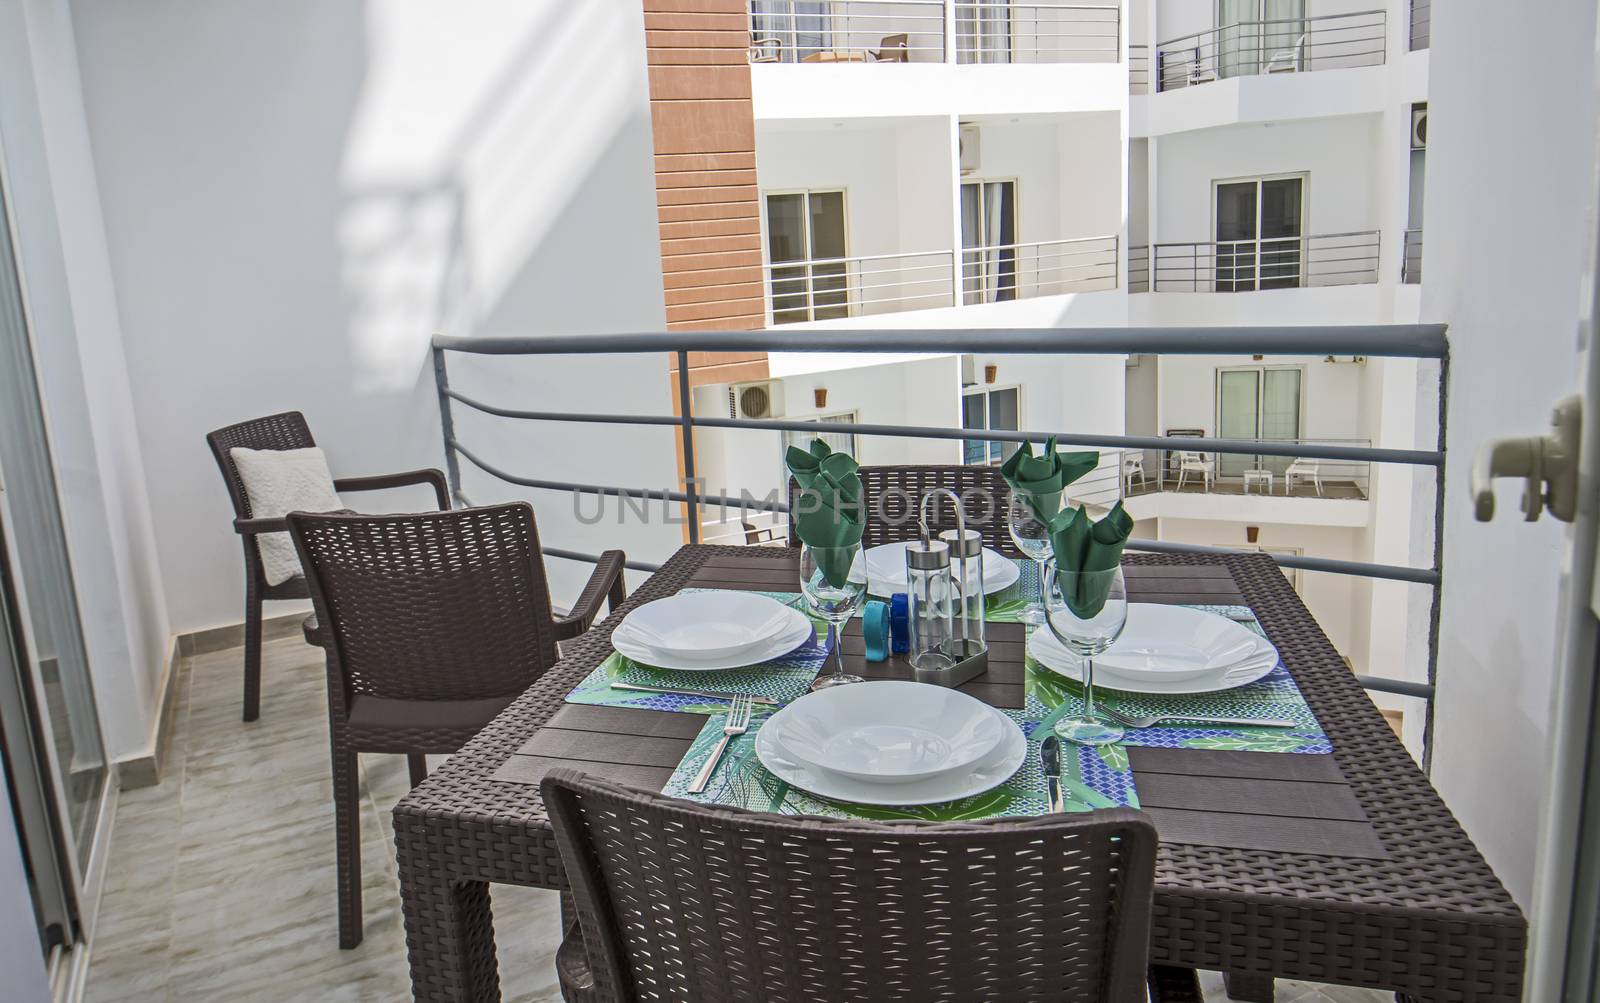 Terrace furniture of a luxury apartment in tropical resort with plastic dining table furniture